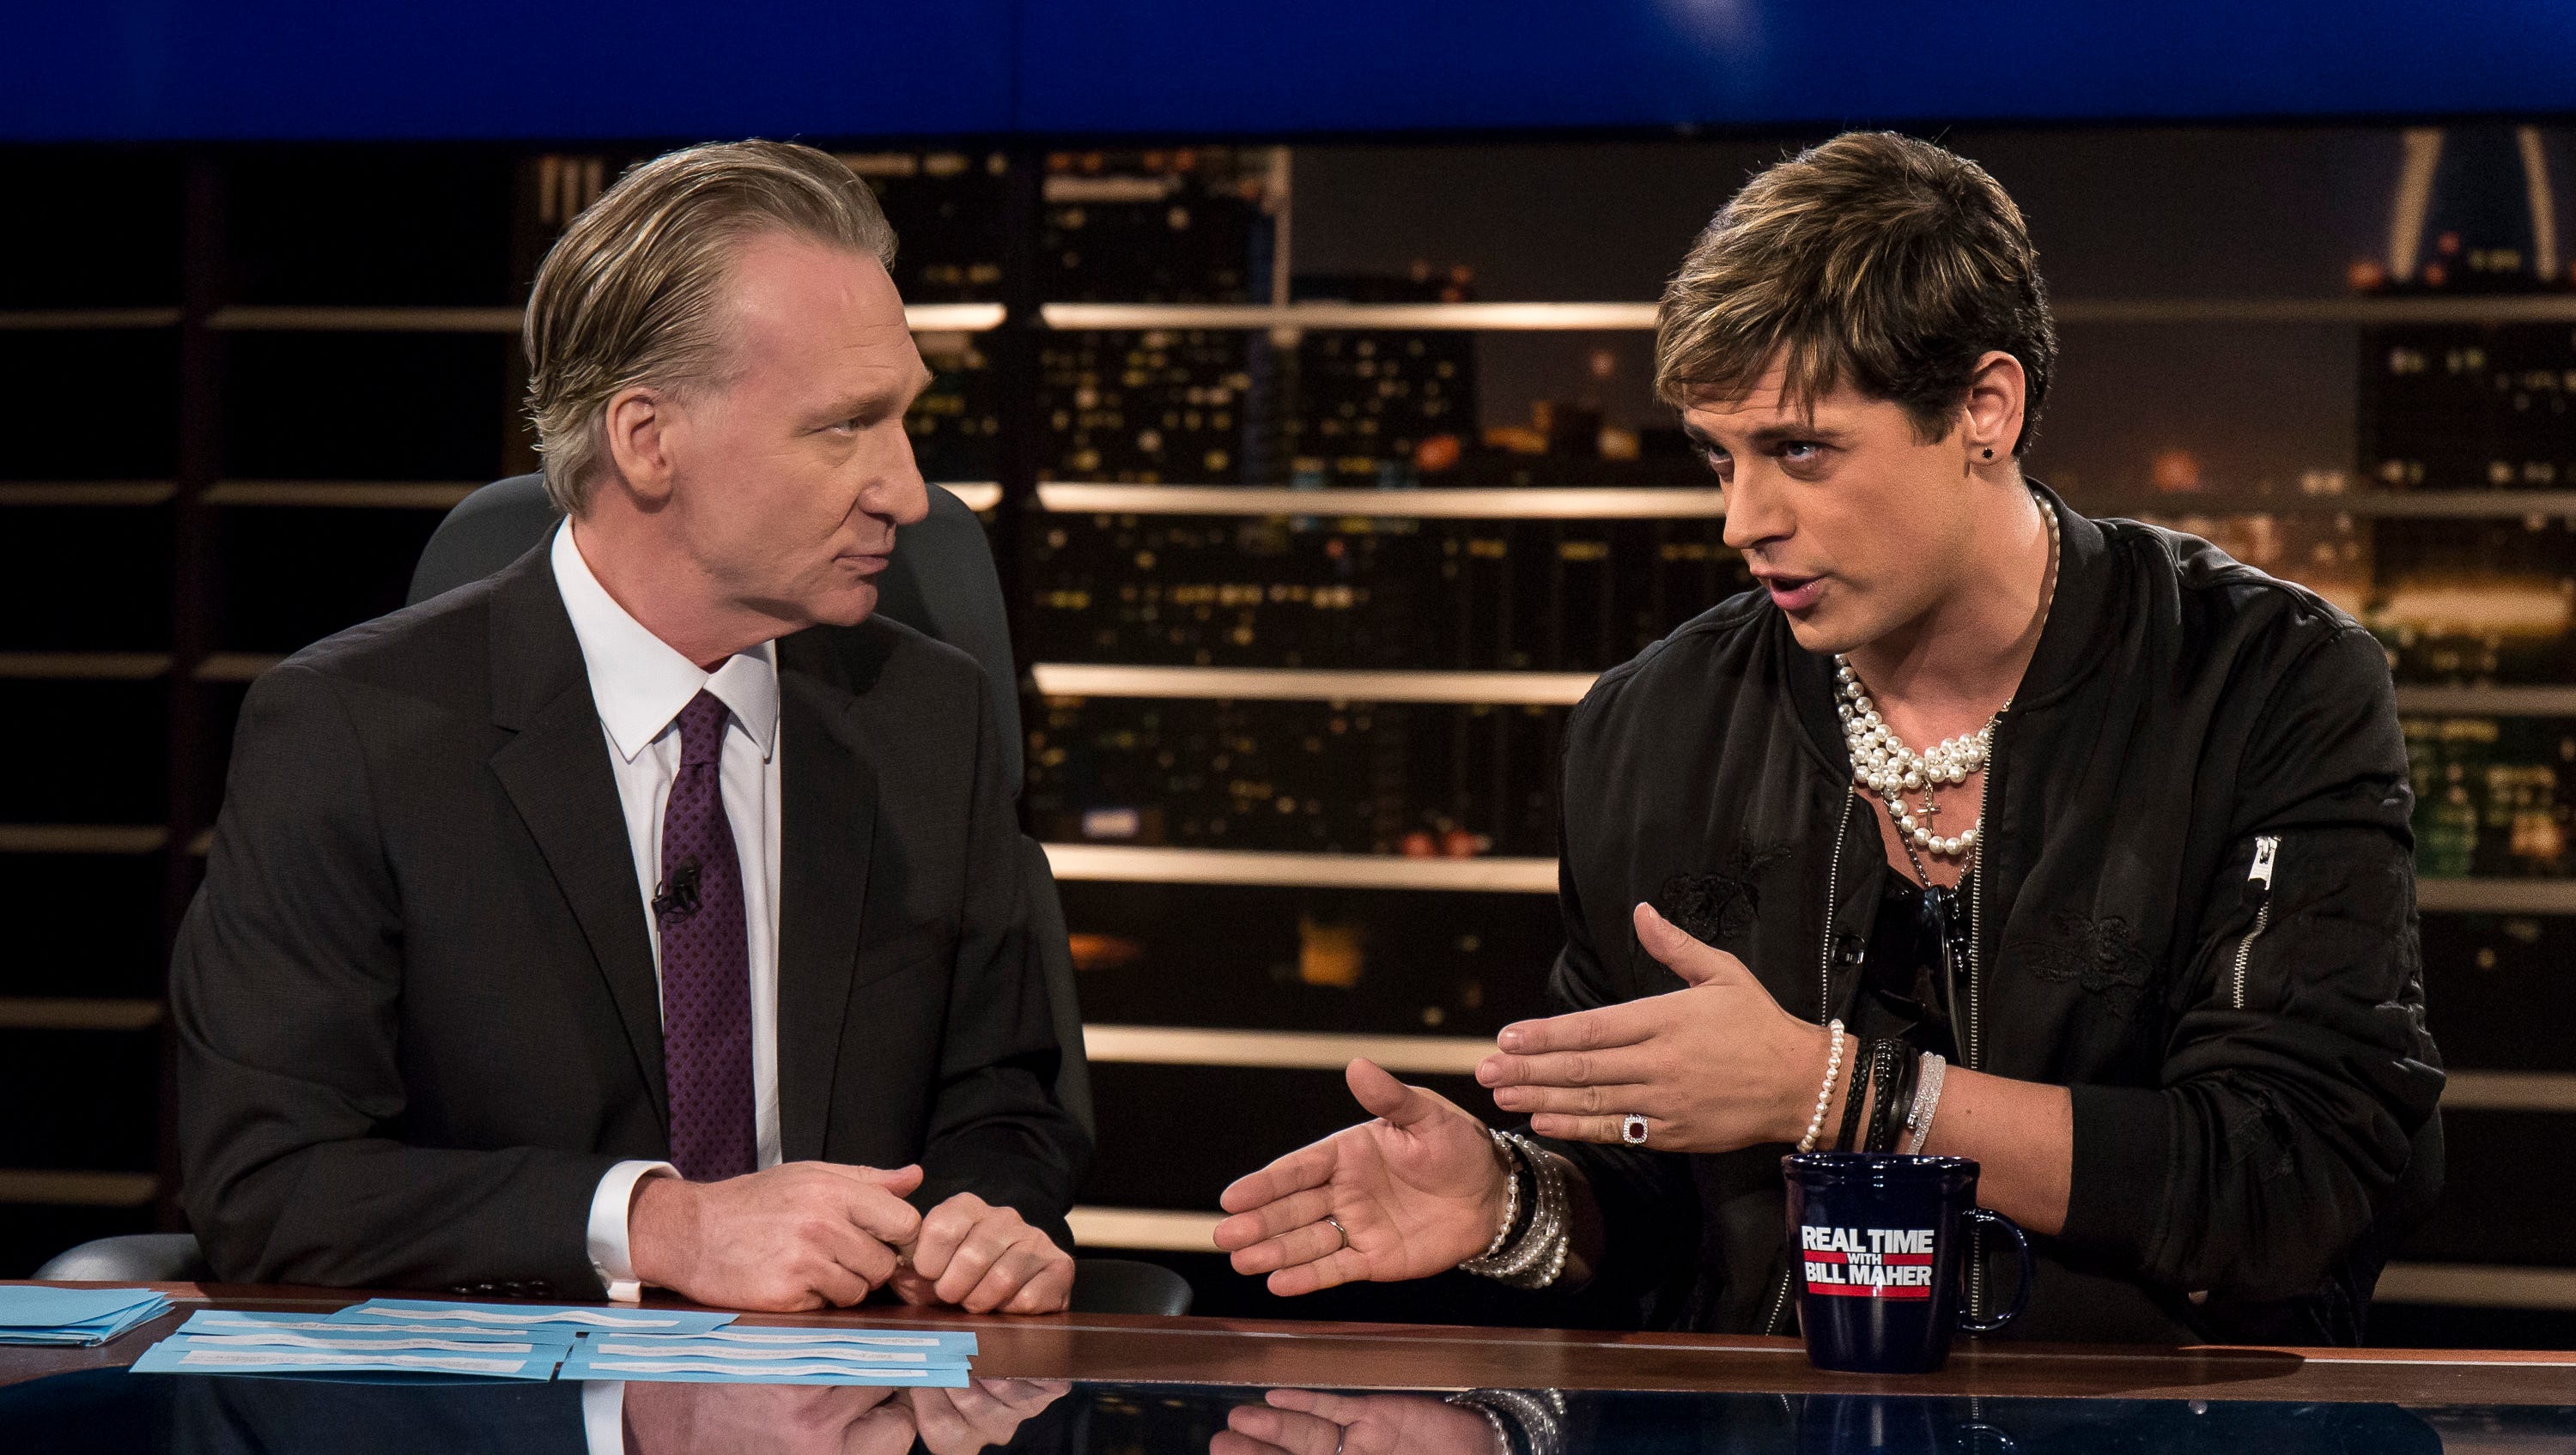 Like Milo Y Bill Maher Once Defended Sex Between Adults And Minors 